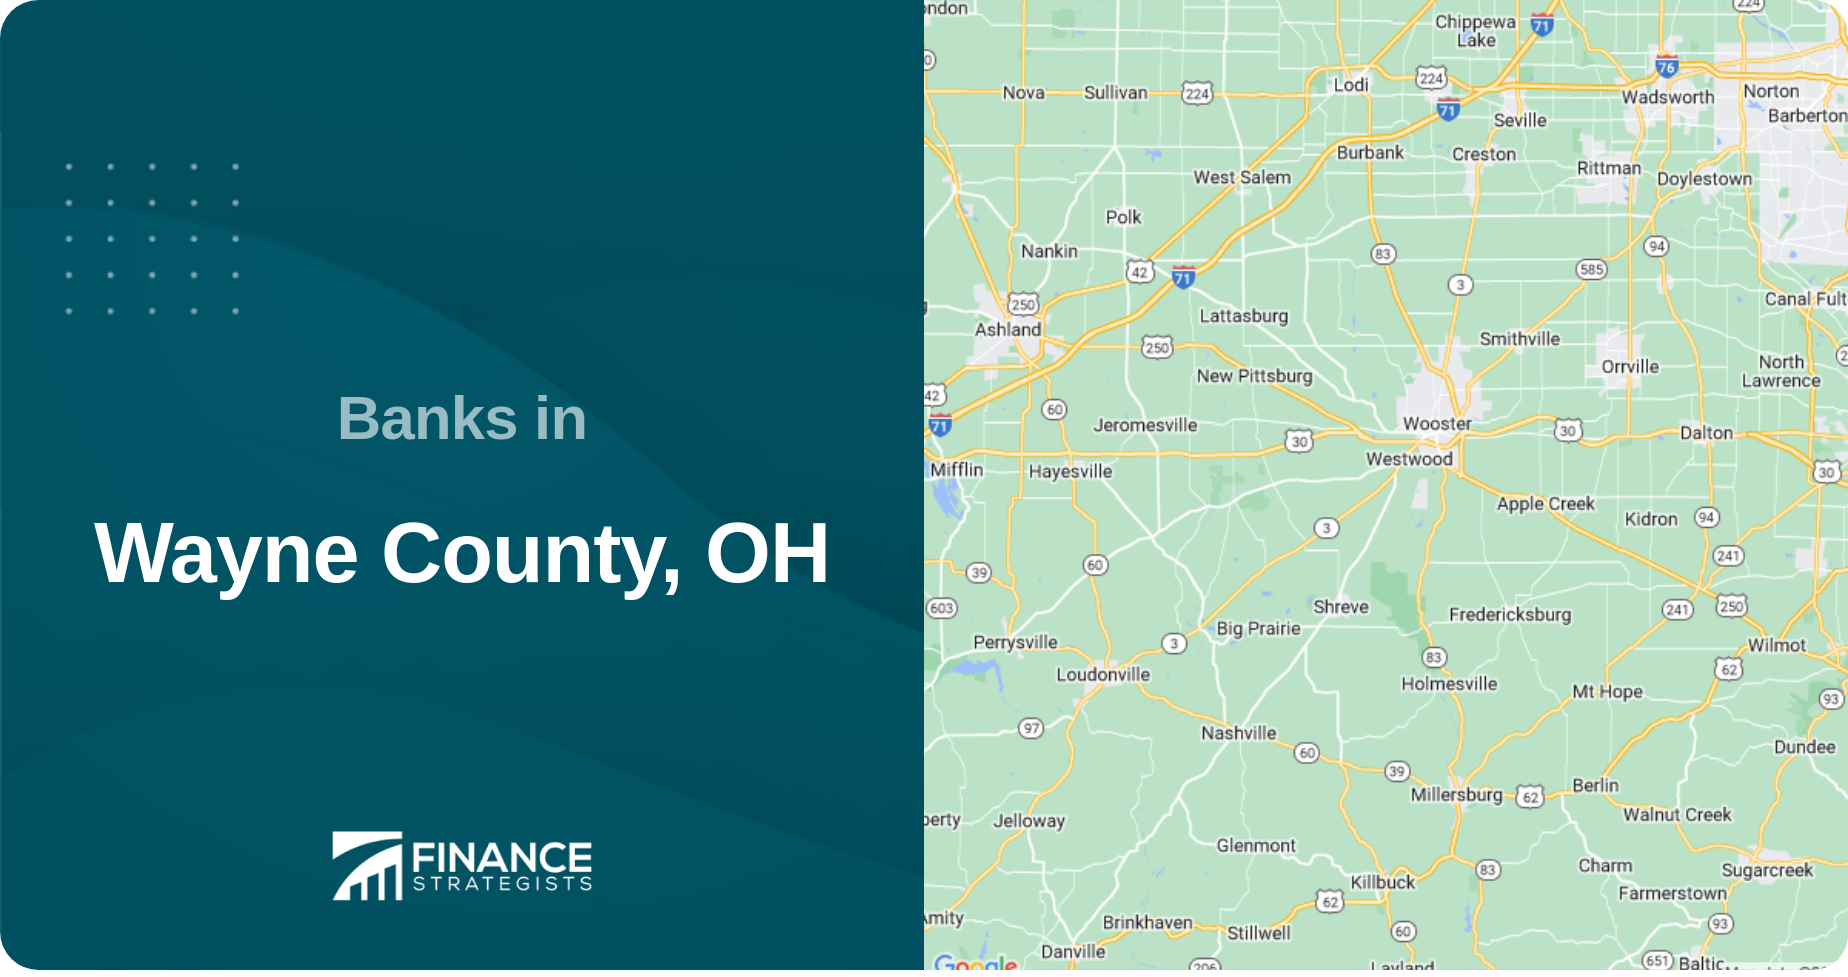 Banks in Wayne County, OH